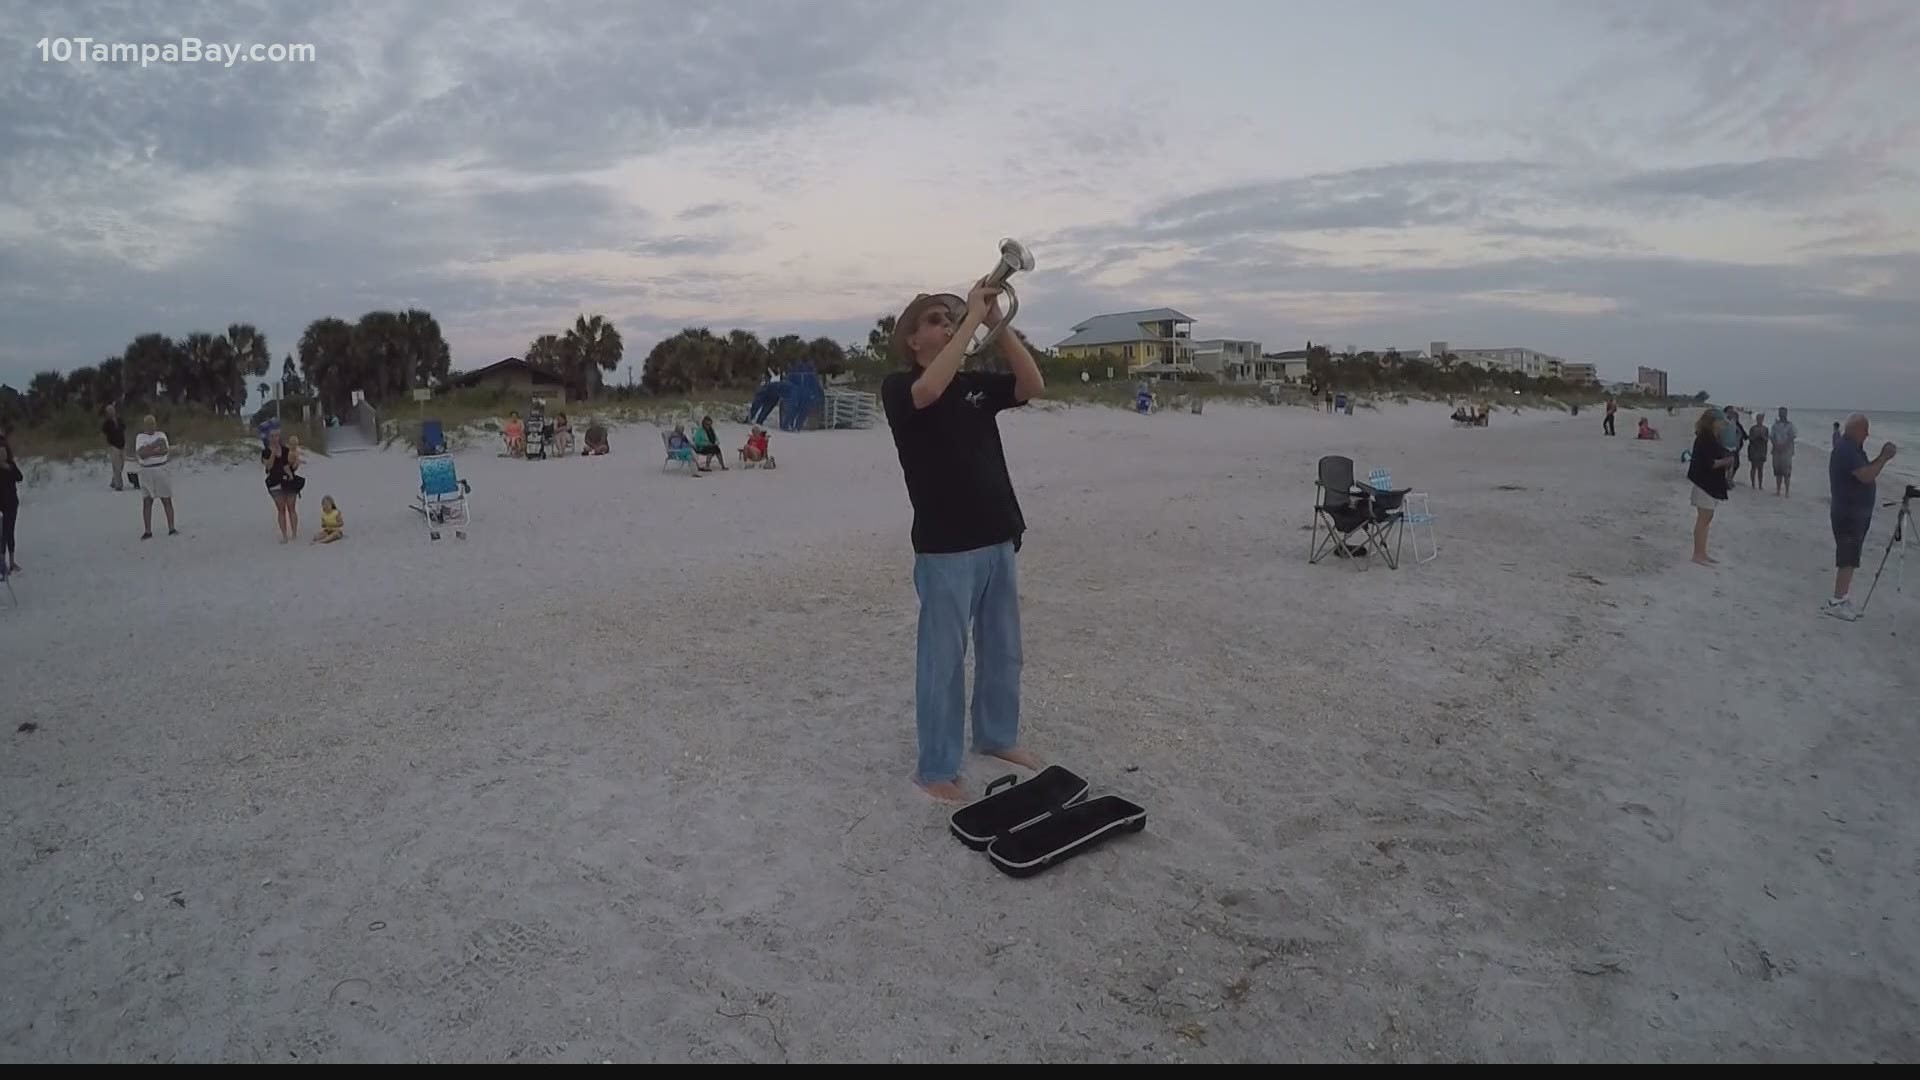 Ken Deka learned to play the song while serving in the military and decided to honor friends from the service with those 24 notes each night at Indian Rocks Beach.